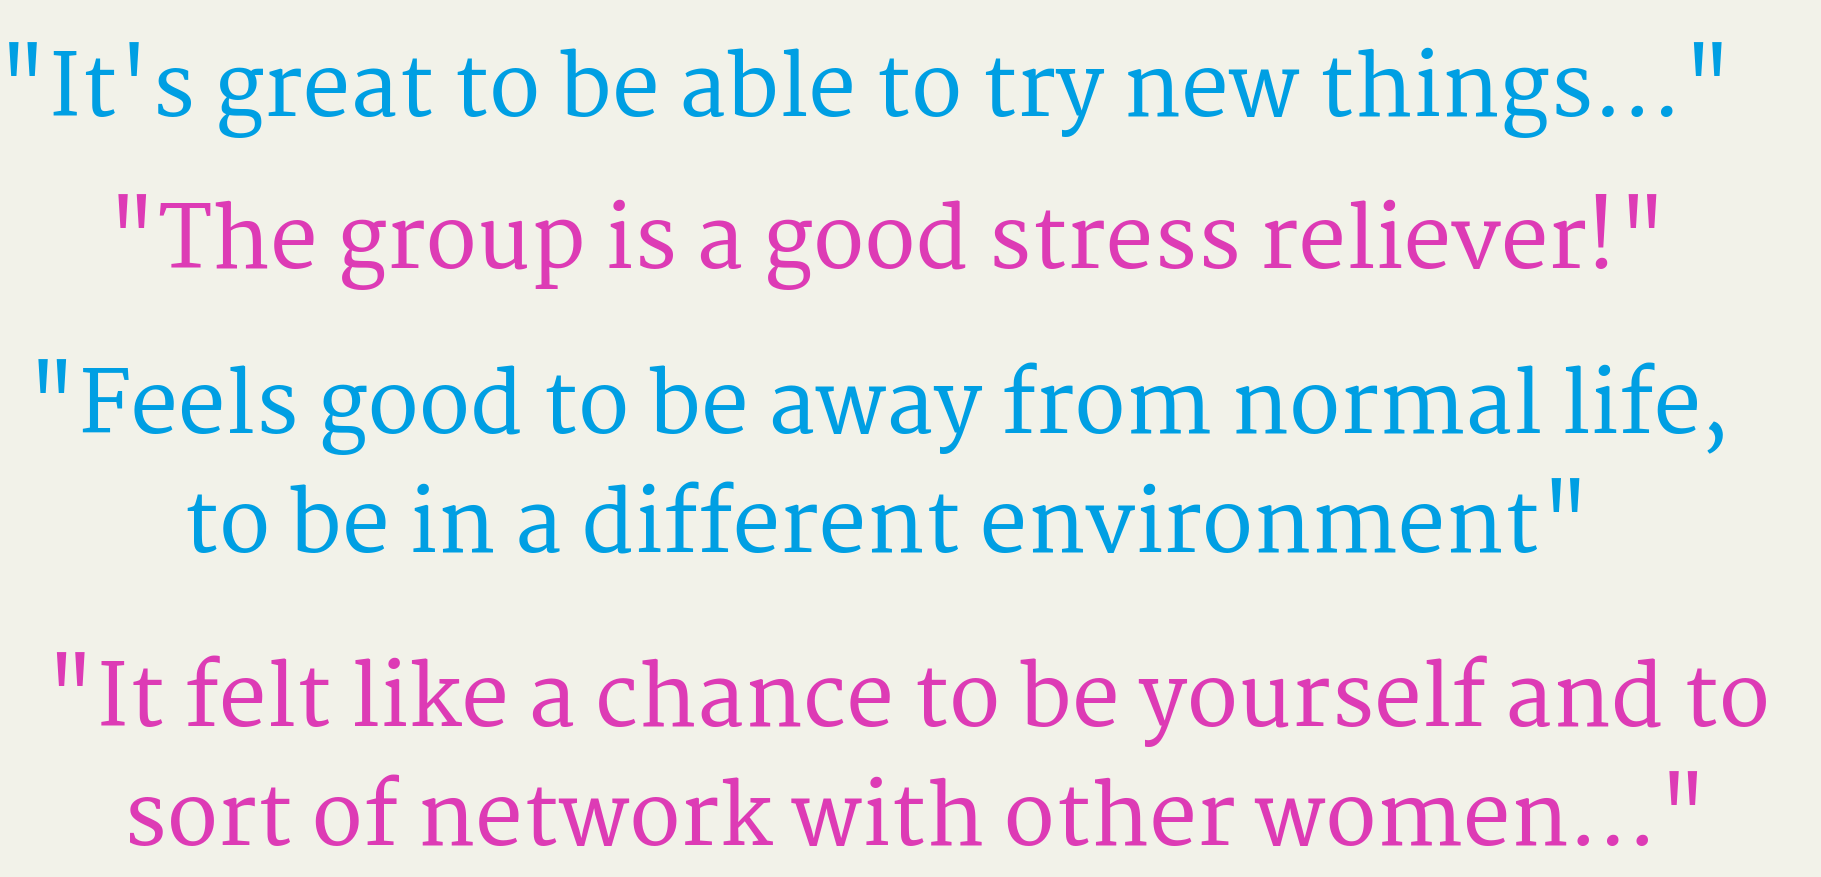 What our clients have said about the Women Together group